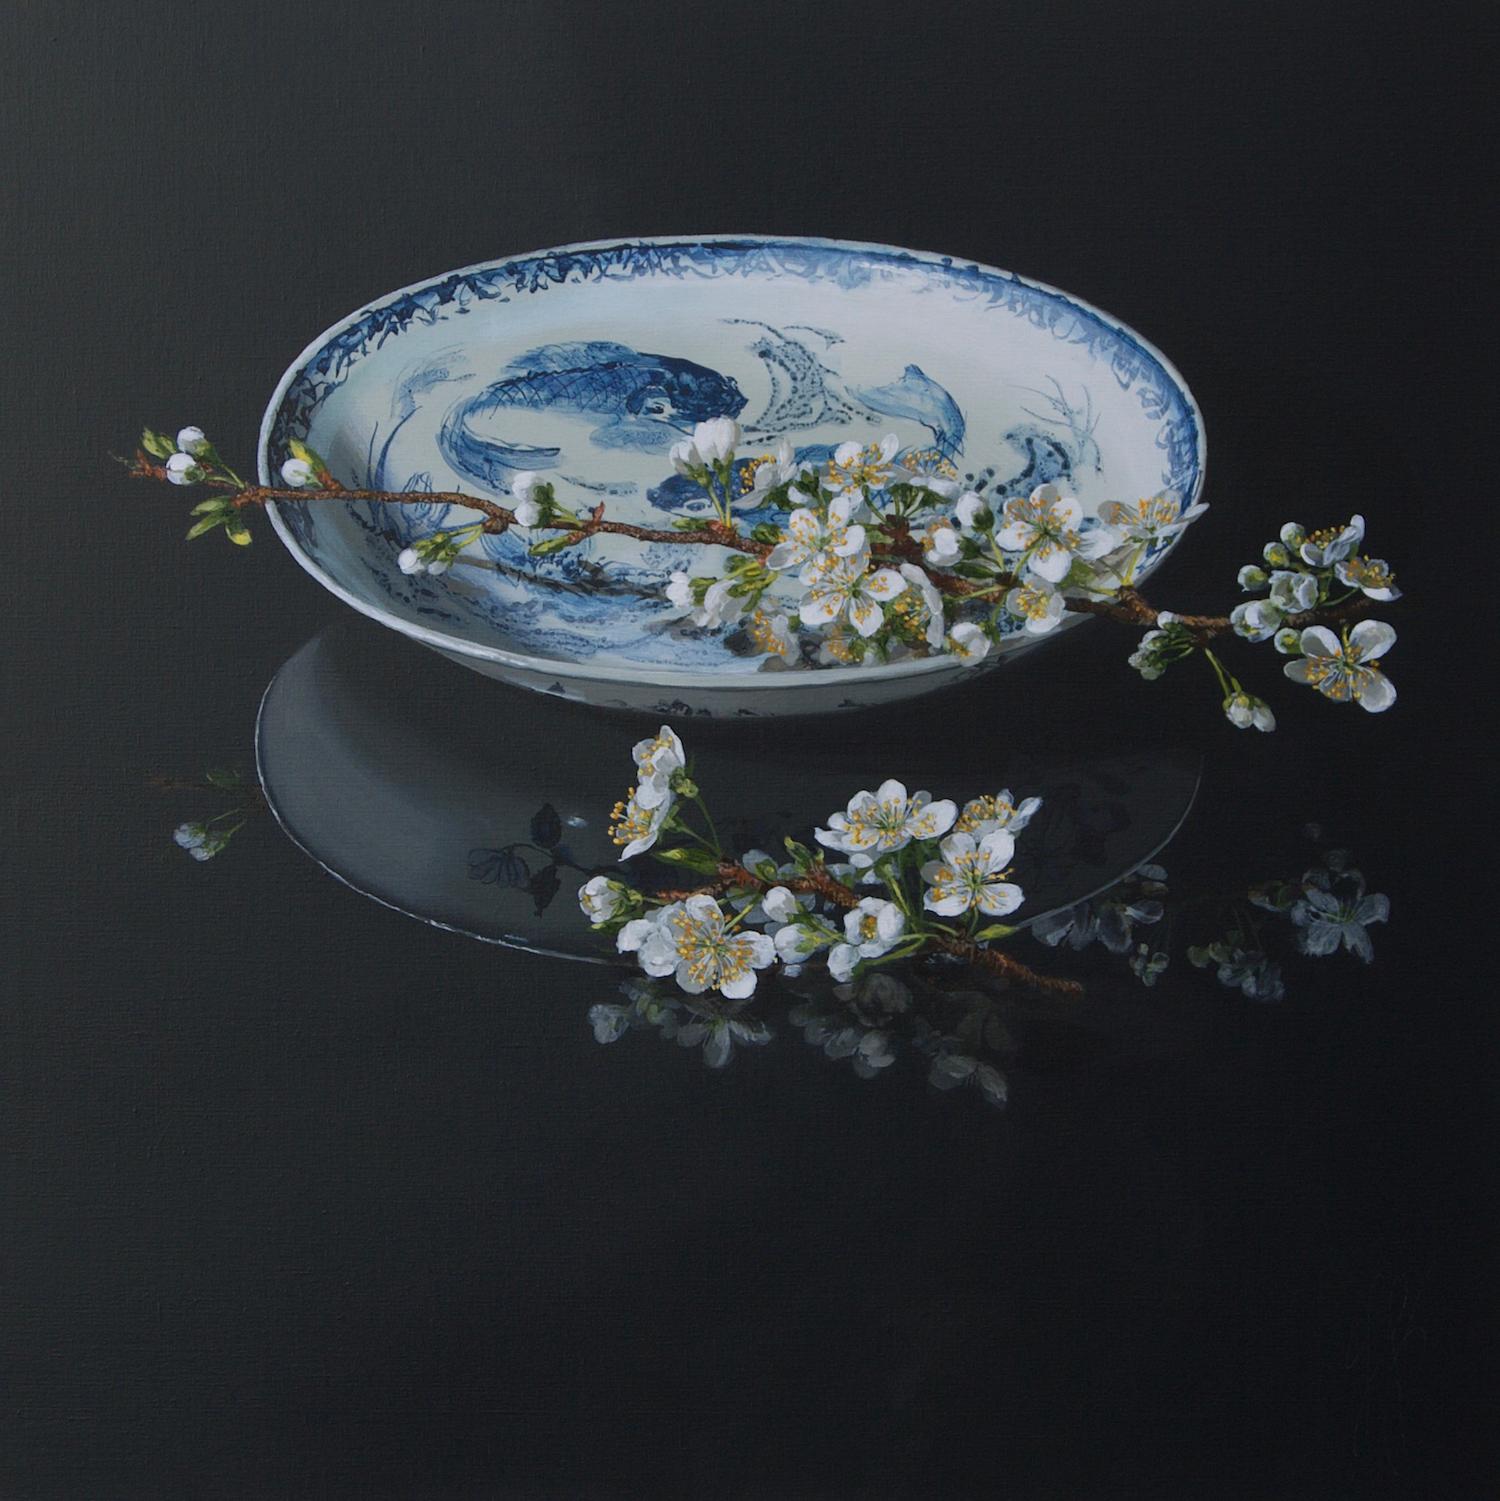 Sasja Wagenaar Still-Life Painting - ''Pear Blossom'', Dutch Contemporary Still Life with Porcelain and White Blossom